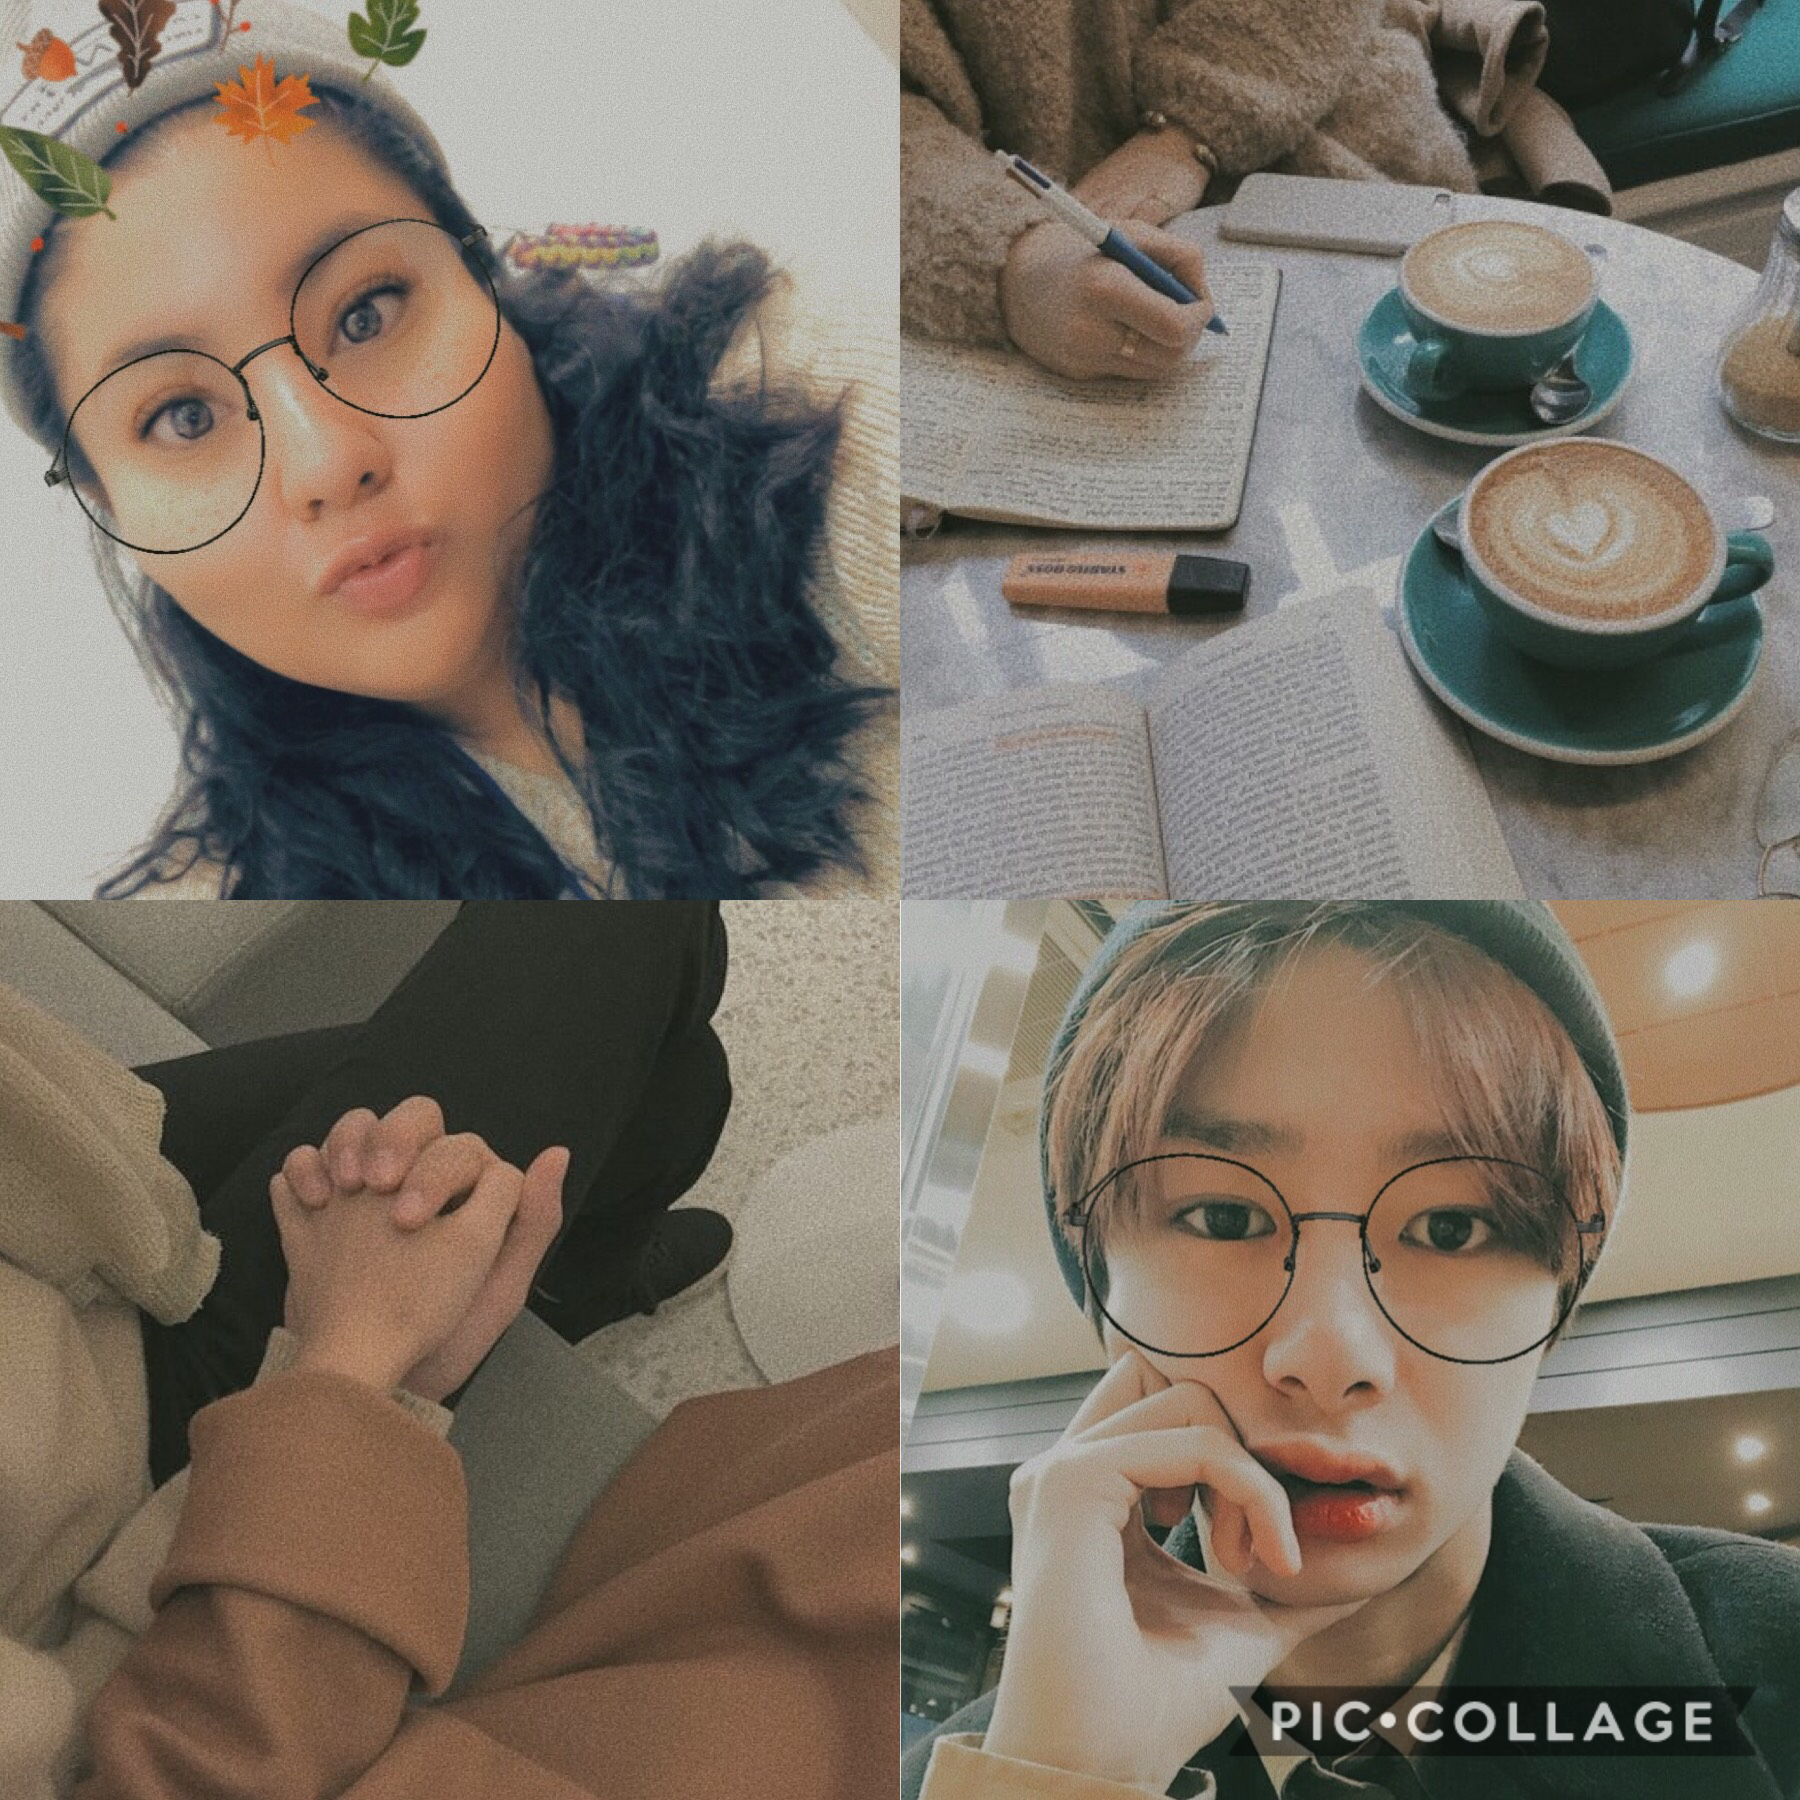 :¨·.·¨:  
 `·.. ➳𝙼𝚎 𝚊𝚗𝚍 𝚢𝚘𝚞 𝚒𝚗 𝚝𝚑𝚎 𝚊𝚞𝚝𝚞𝚖𝚗 𝚕𝚎𝚊𝚟𝚎𝚜
#monbebeselcaday
I forgot to post this earlier in the day but what do you guys think?